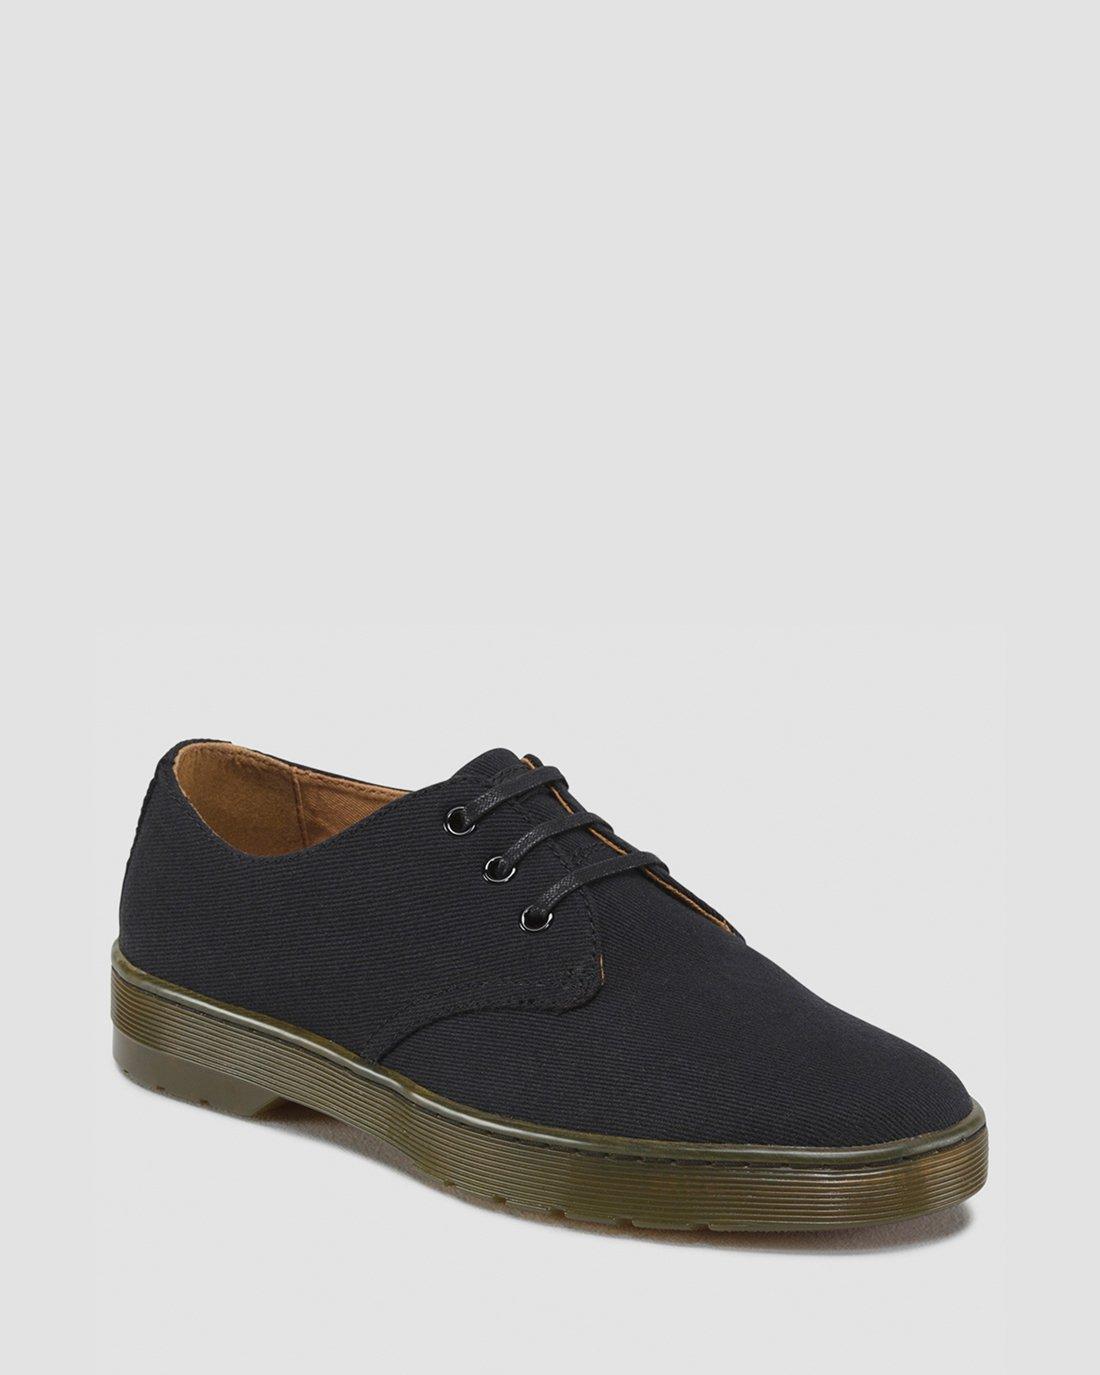 DELRAY TWILL CANVAS | Dr. Martens UK